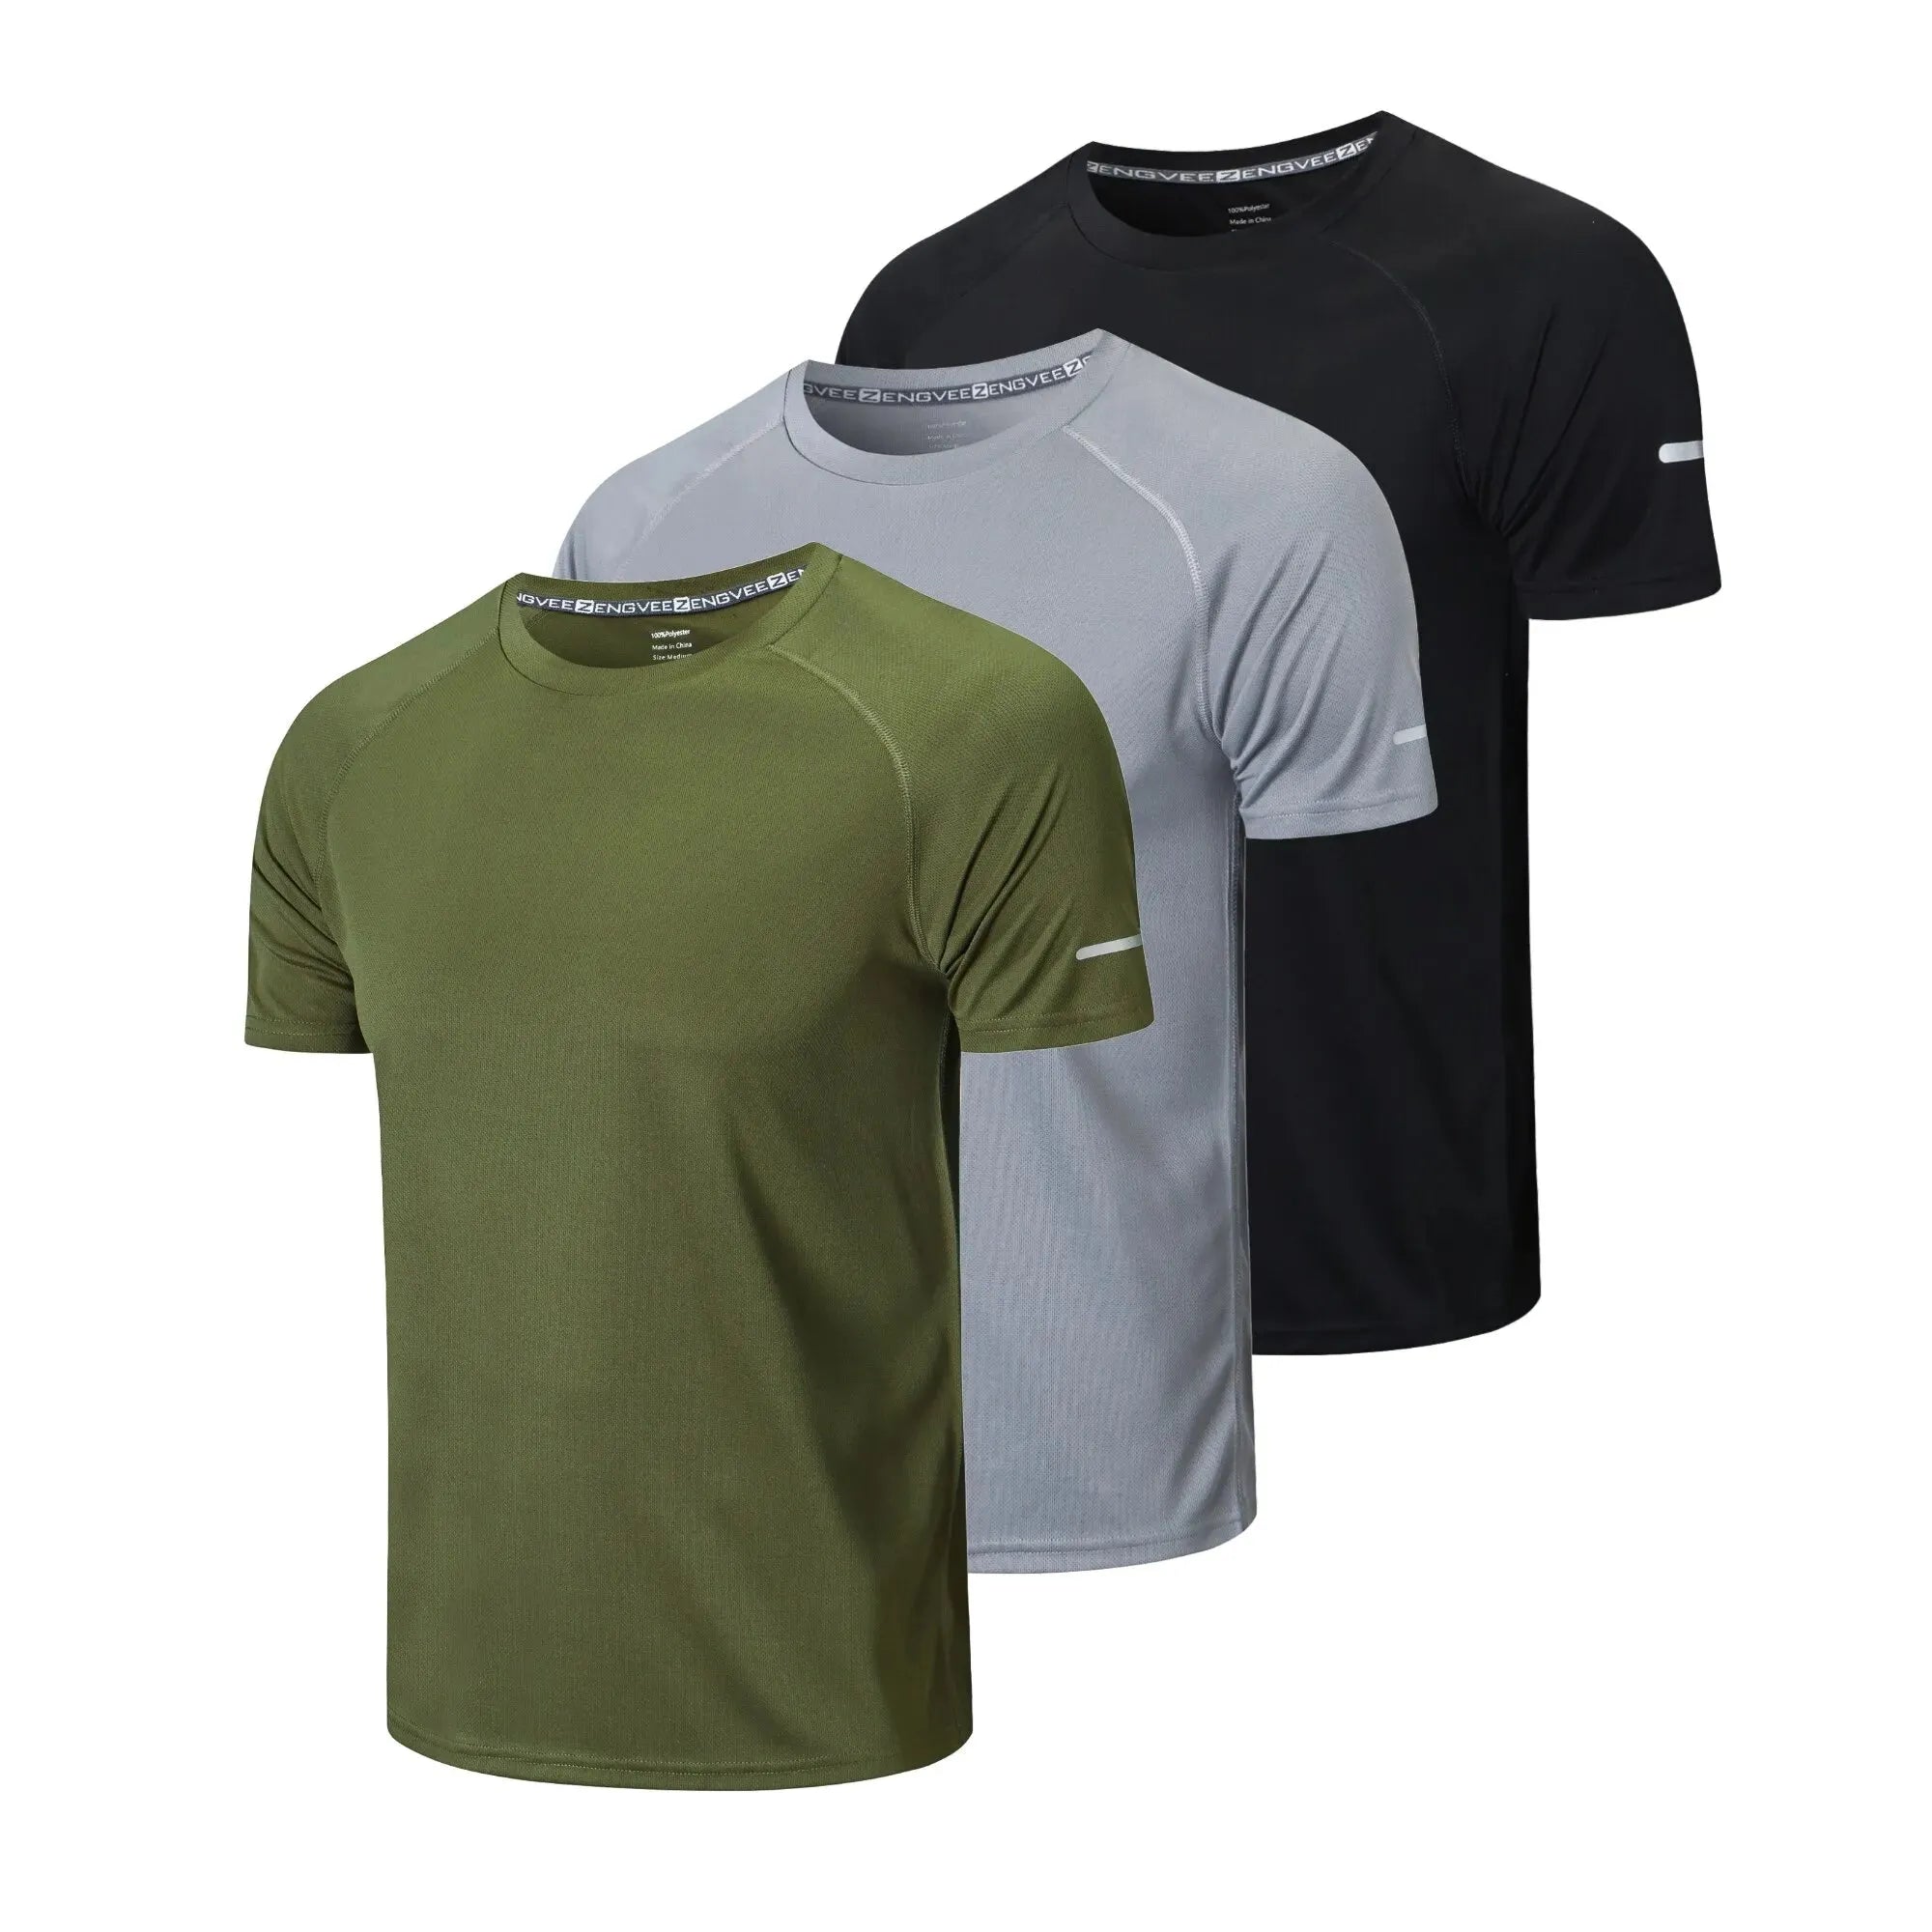 ZengVee 3 Pack Running Shirts Men Dry-Fit Workout Moisture Wicking Active Athletic Sport Tops